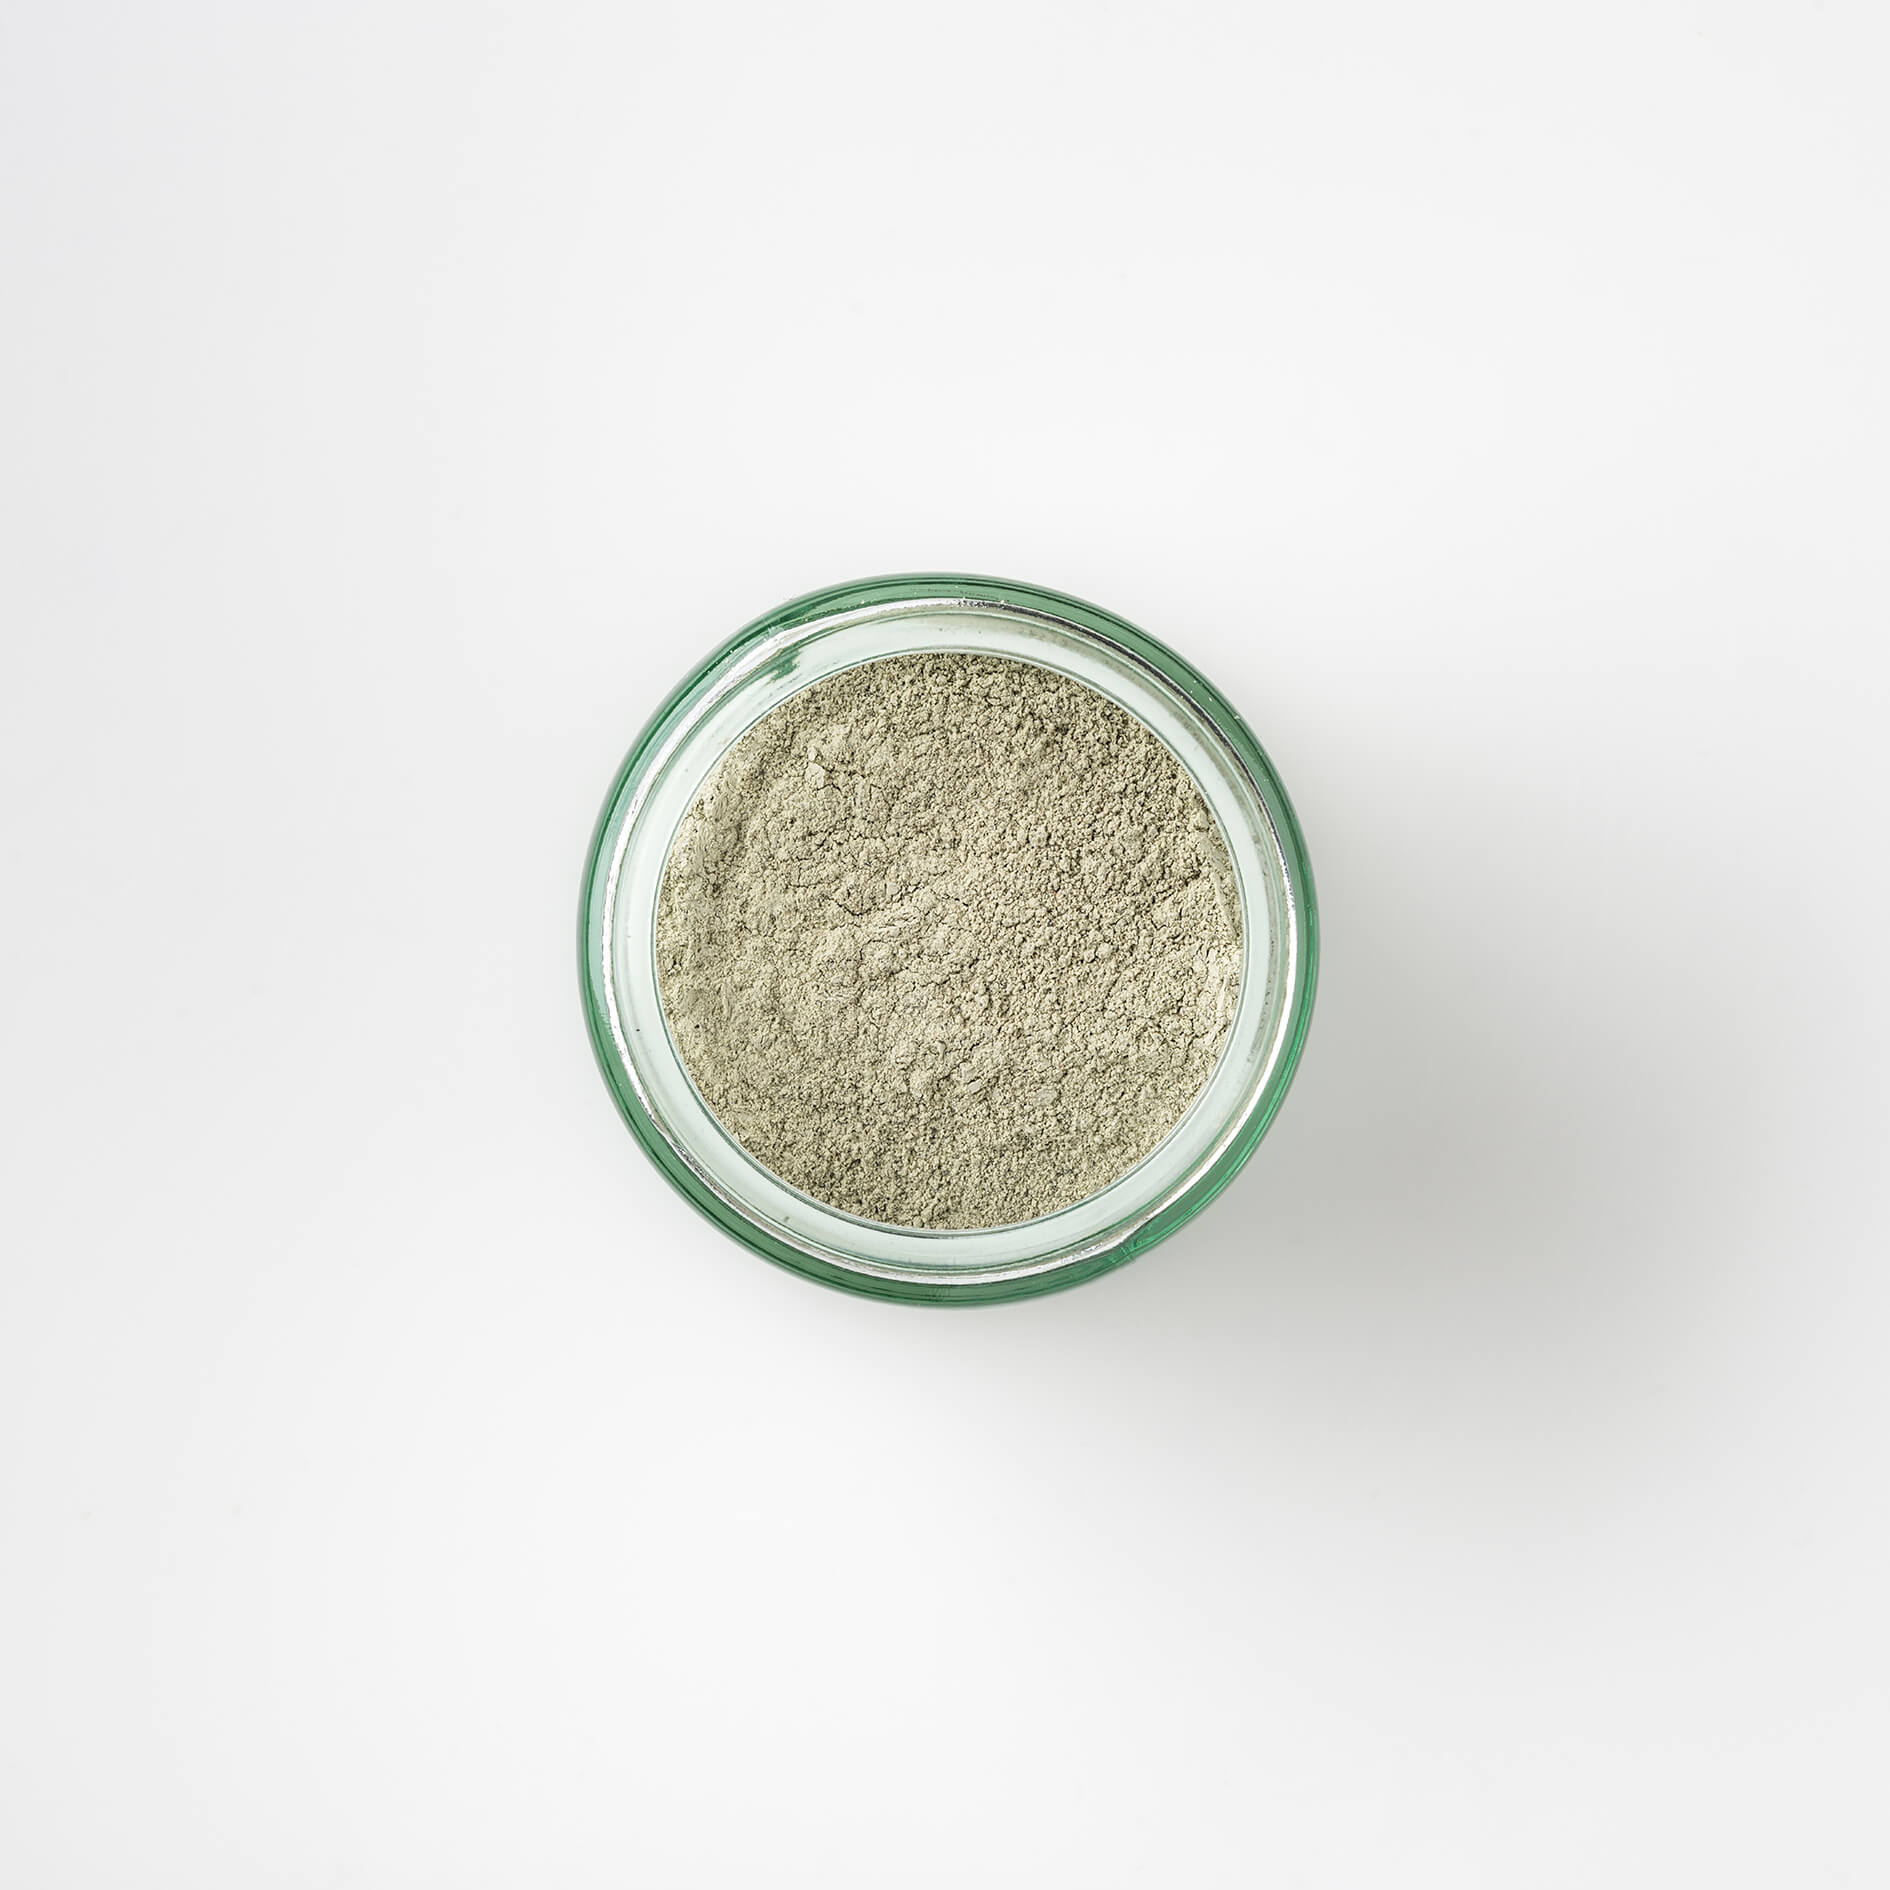 Top view of Bristolmade Green Clay Mask, showing the fine green powder, a blend of french clay and sea kelp for deep cleansing of the skin. 